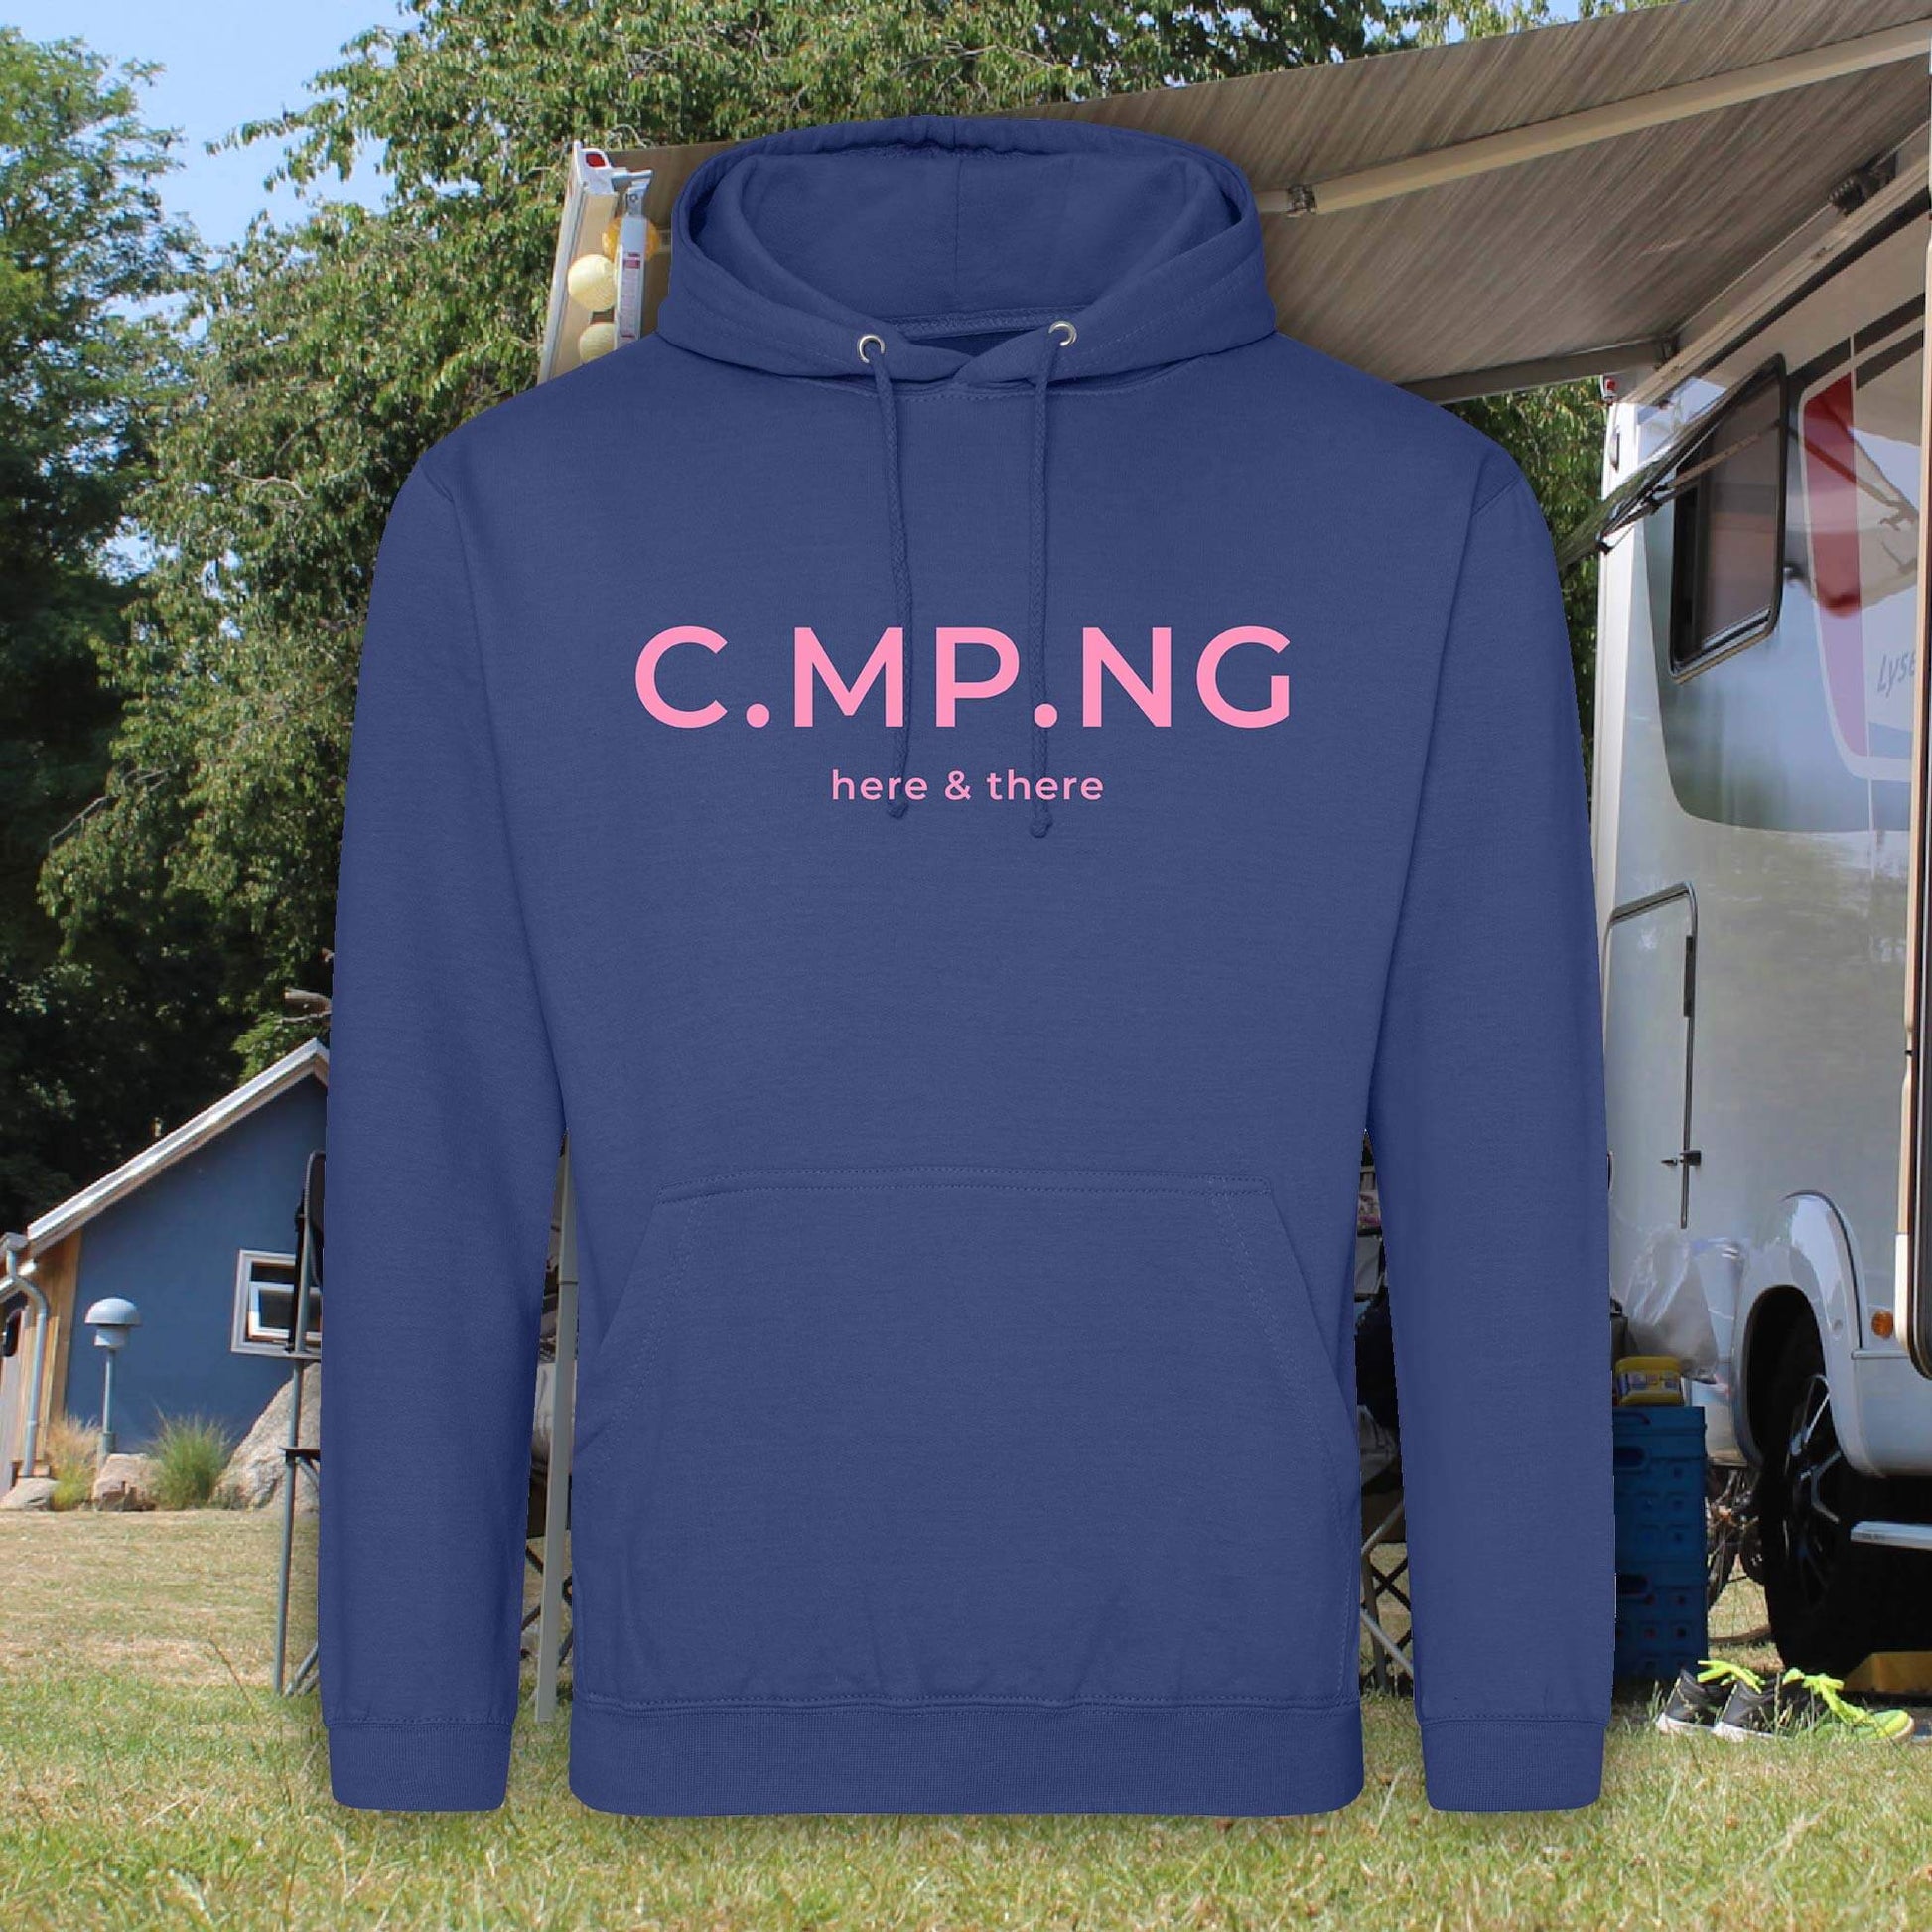 Camping-Hoodie in dunkelblau mit rosa C.MP.NG here and there Aufdruck auf der Brust